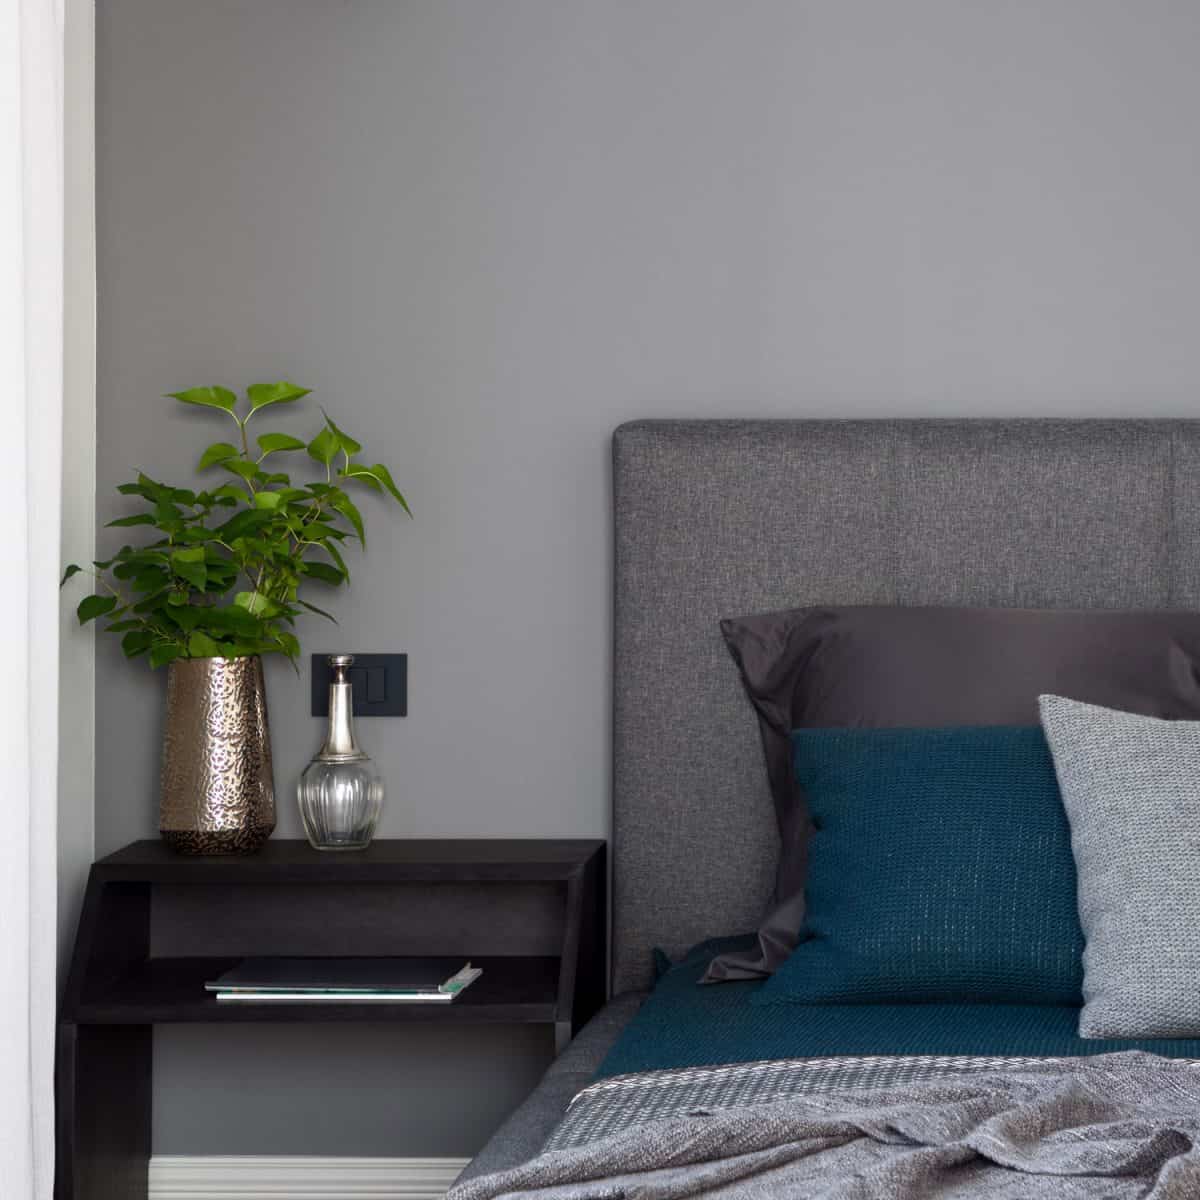 A gorgeous gray bedroom with a black nightstand and plants for decoration